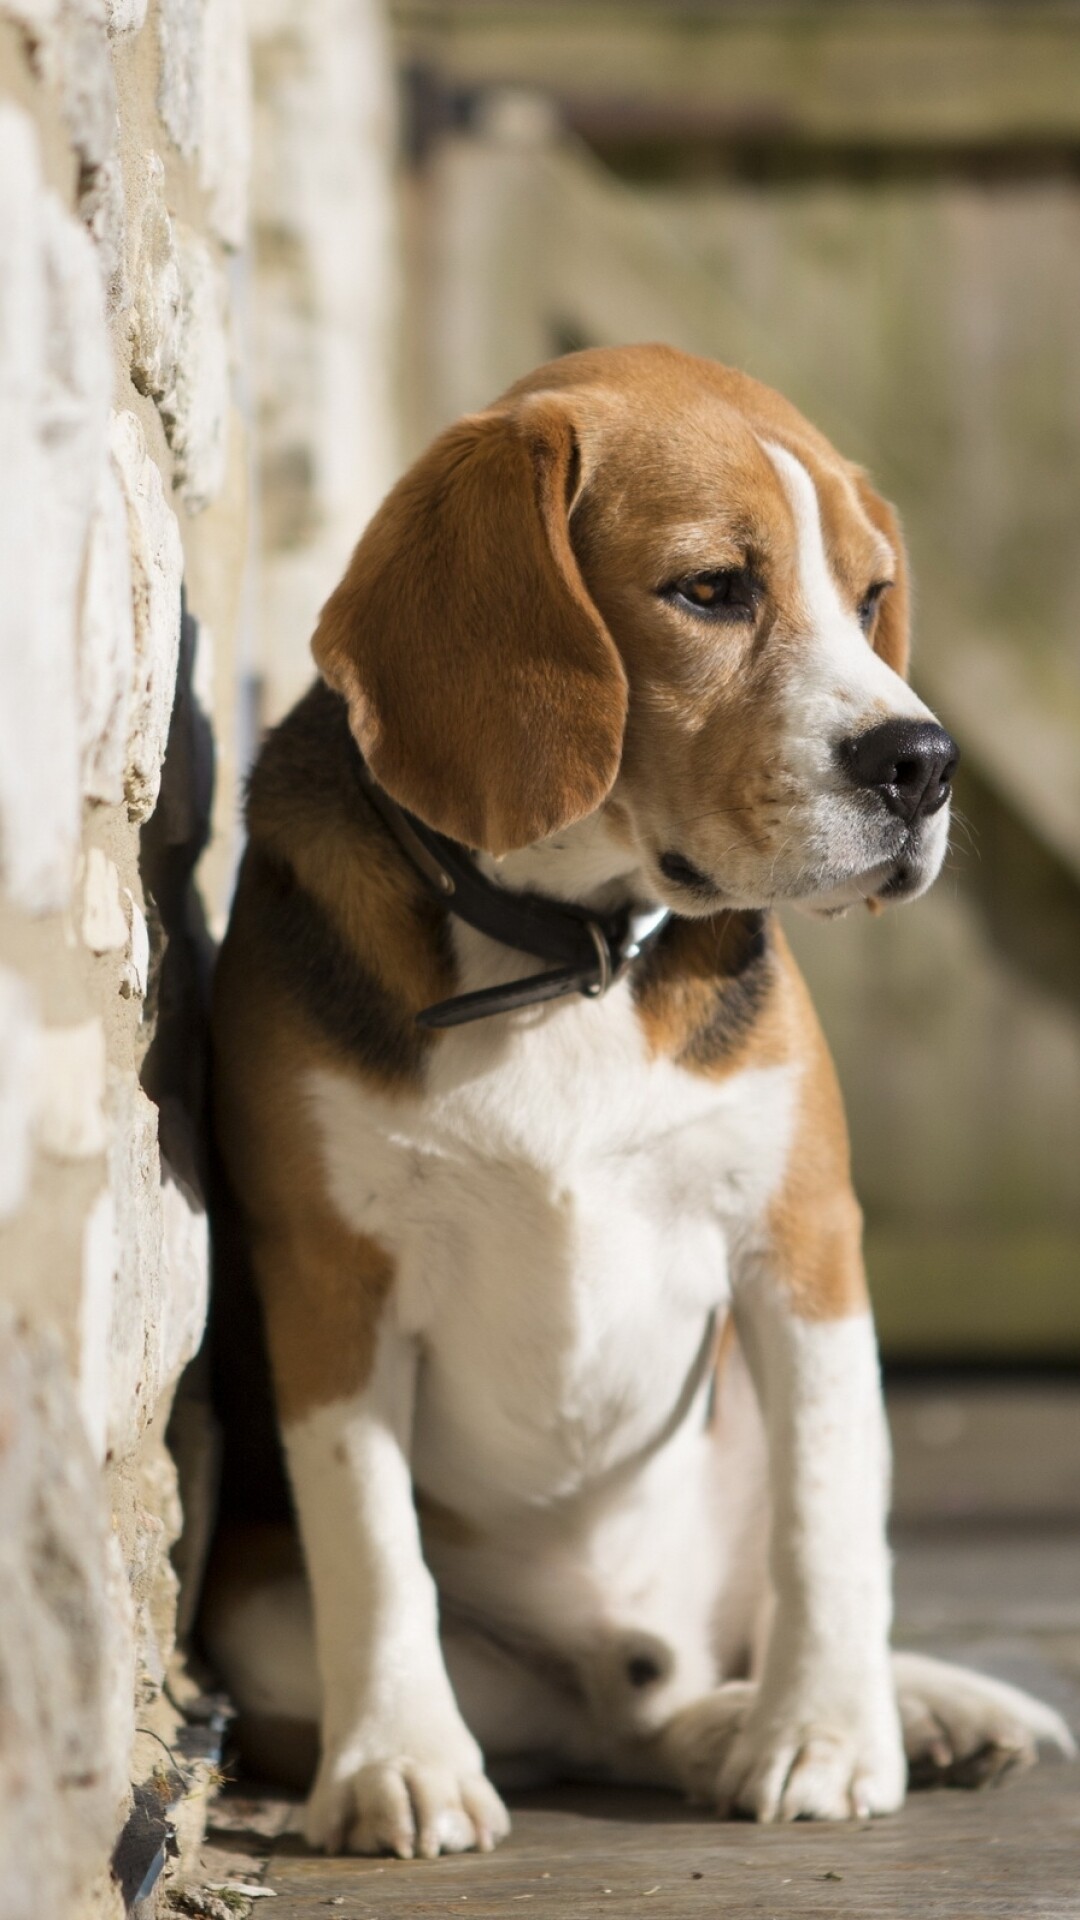 Beagle: The breed is popular as pets because of their good size, sweet temper, and health. 1080x1920 Full HD Background.